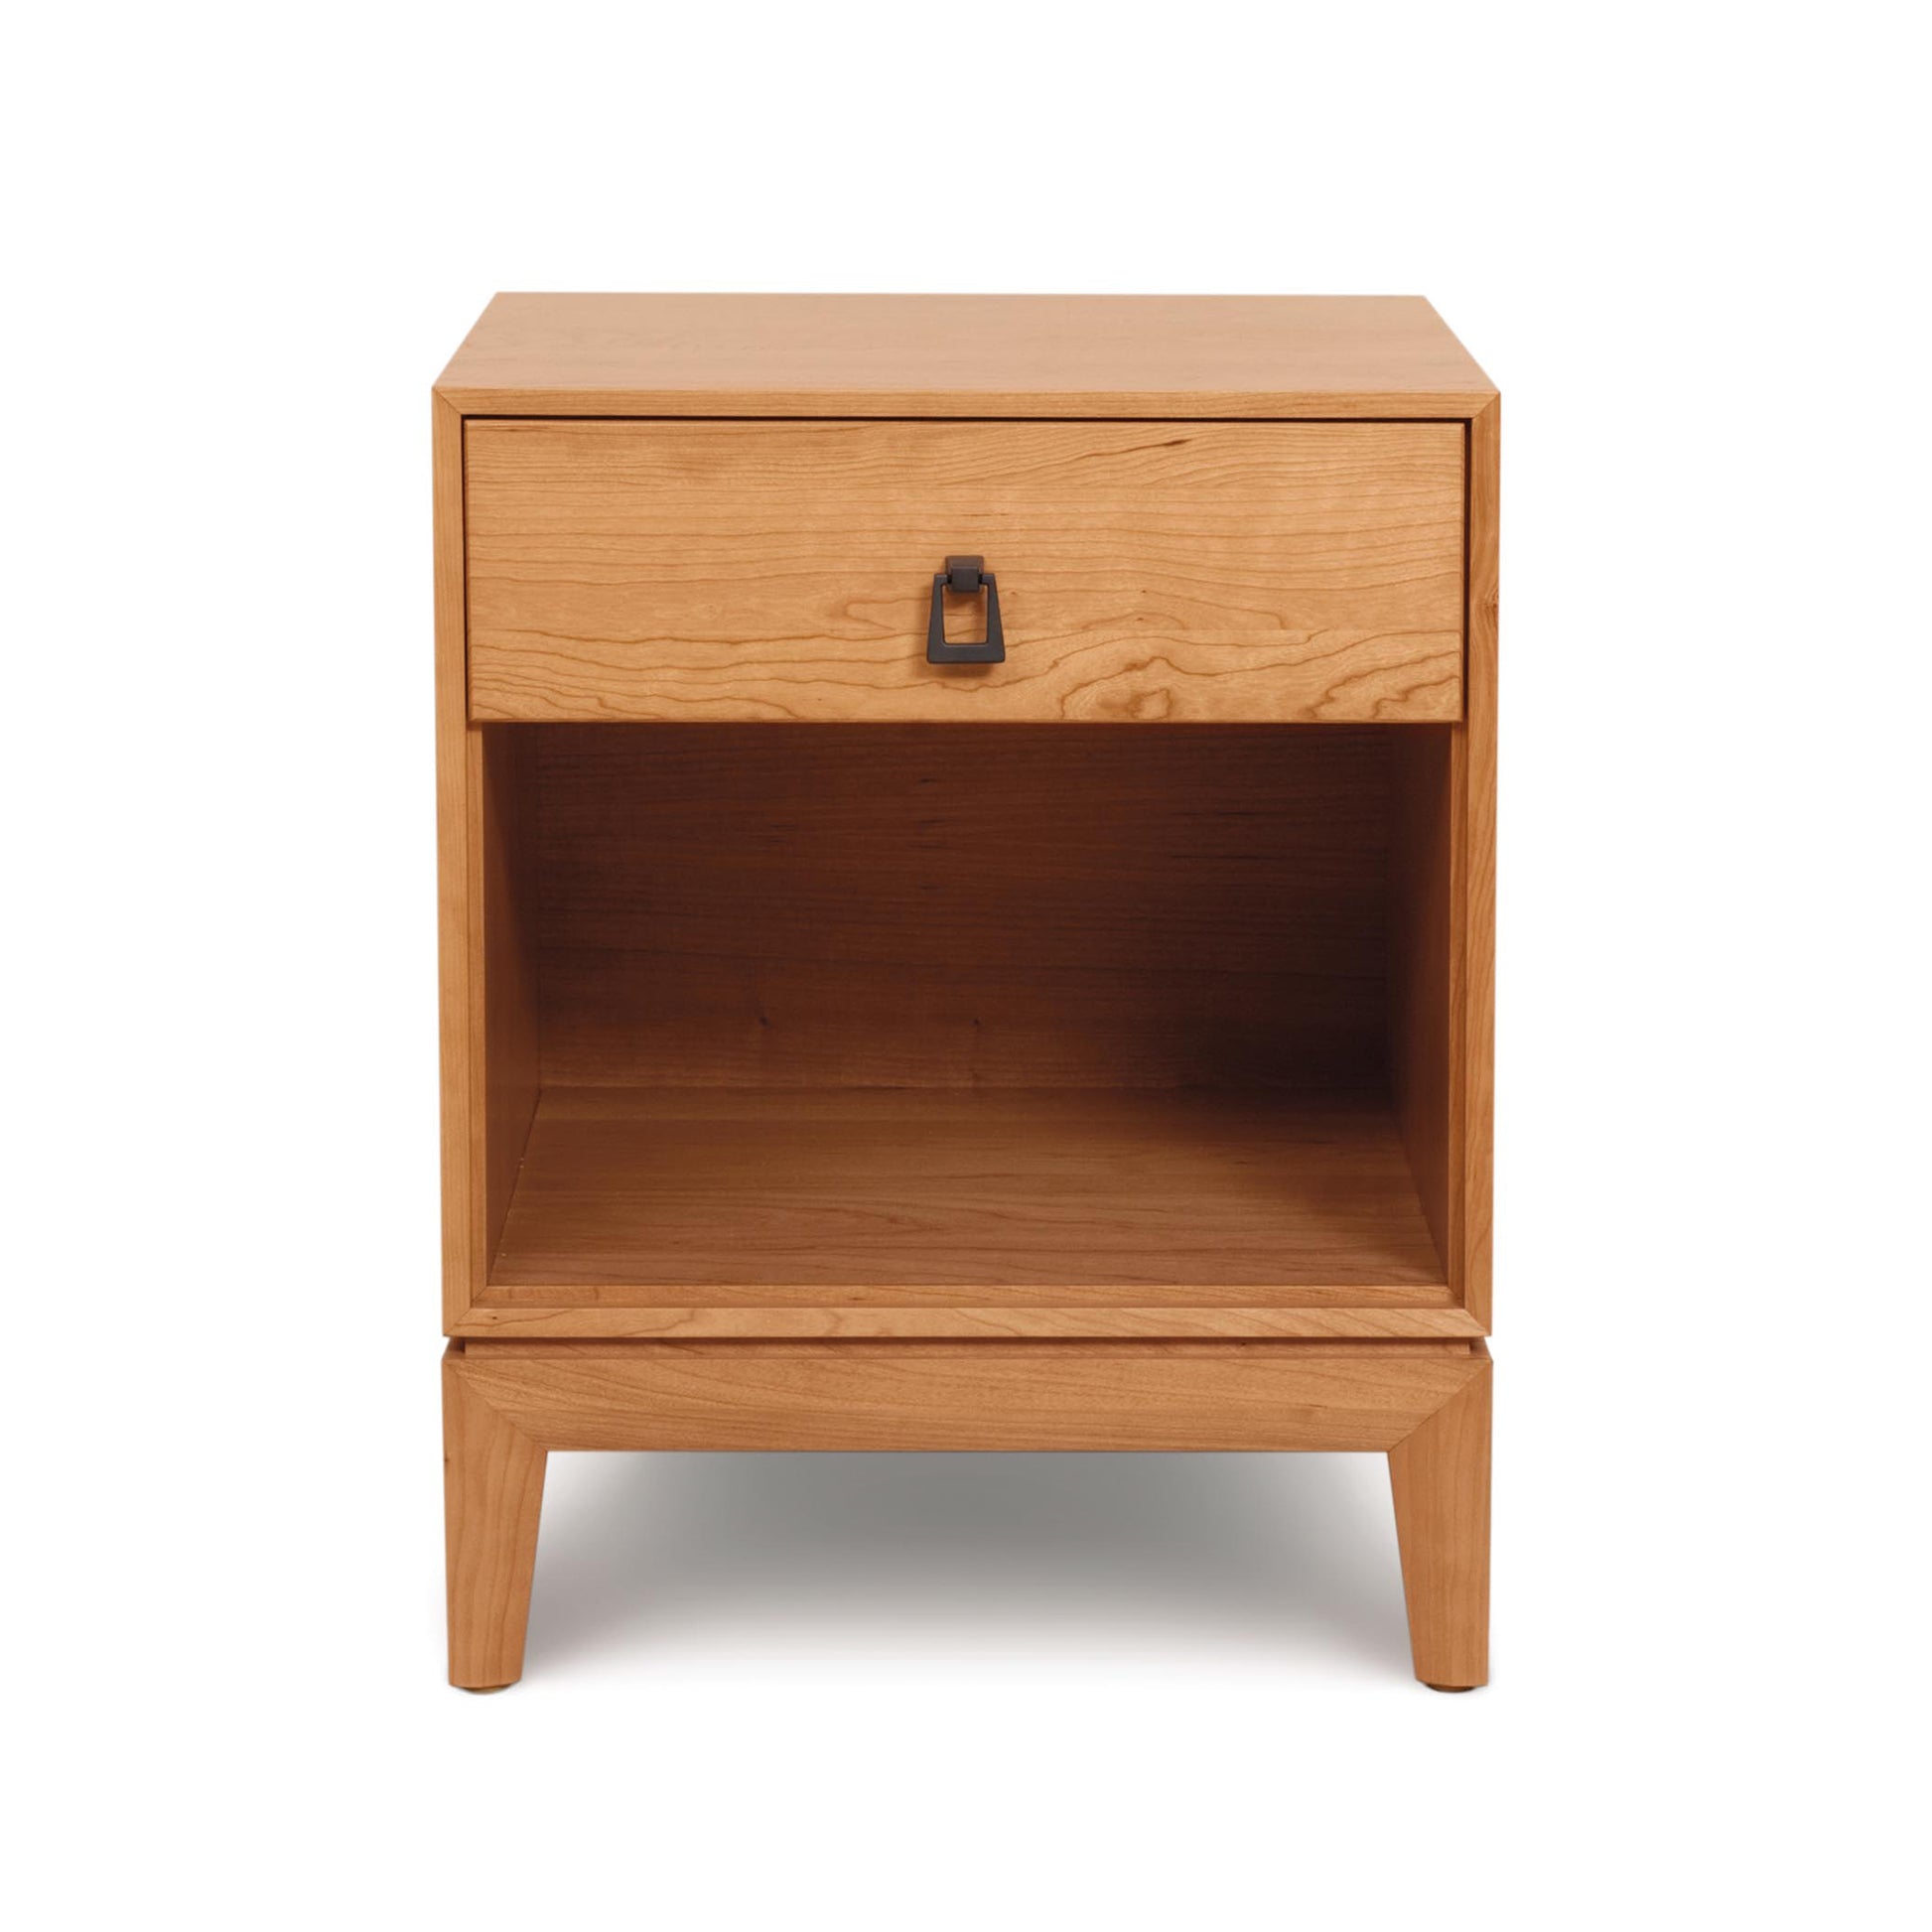 A Mansfield 1-Drawer Enclosed Shelf Nightstand by Copeland Furniture, isolated on a white background.